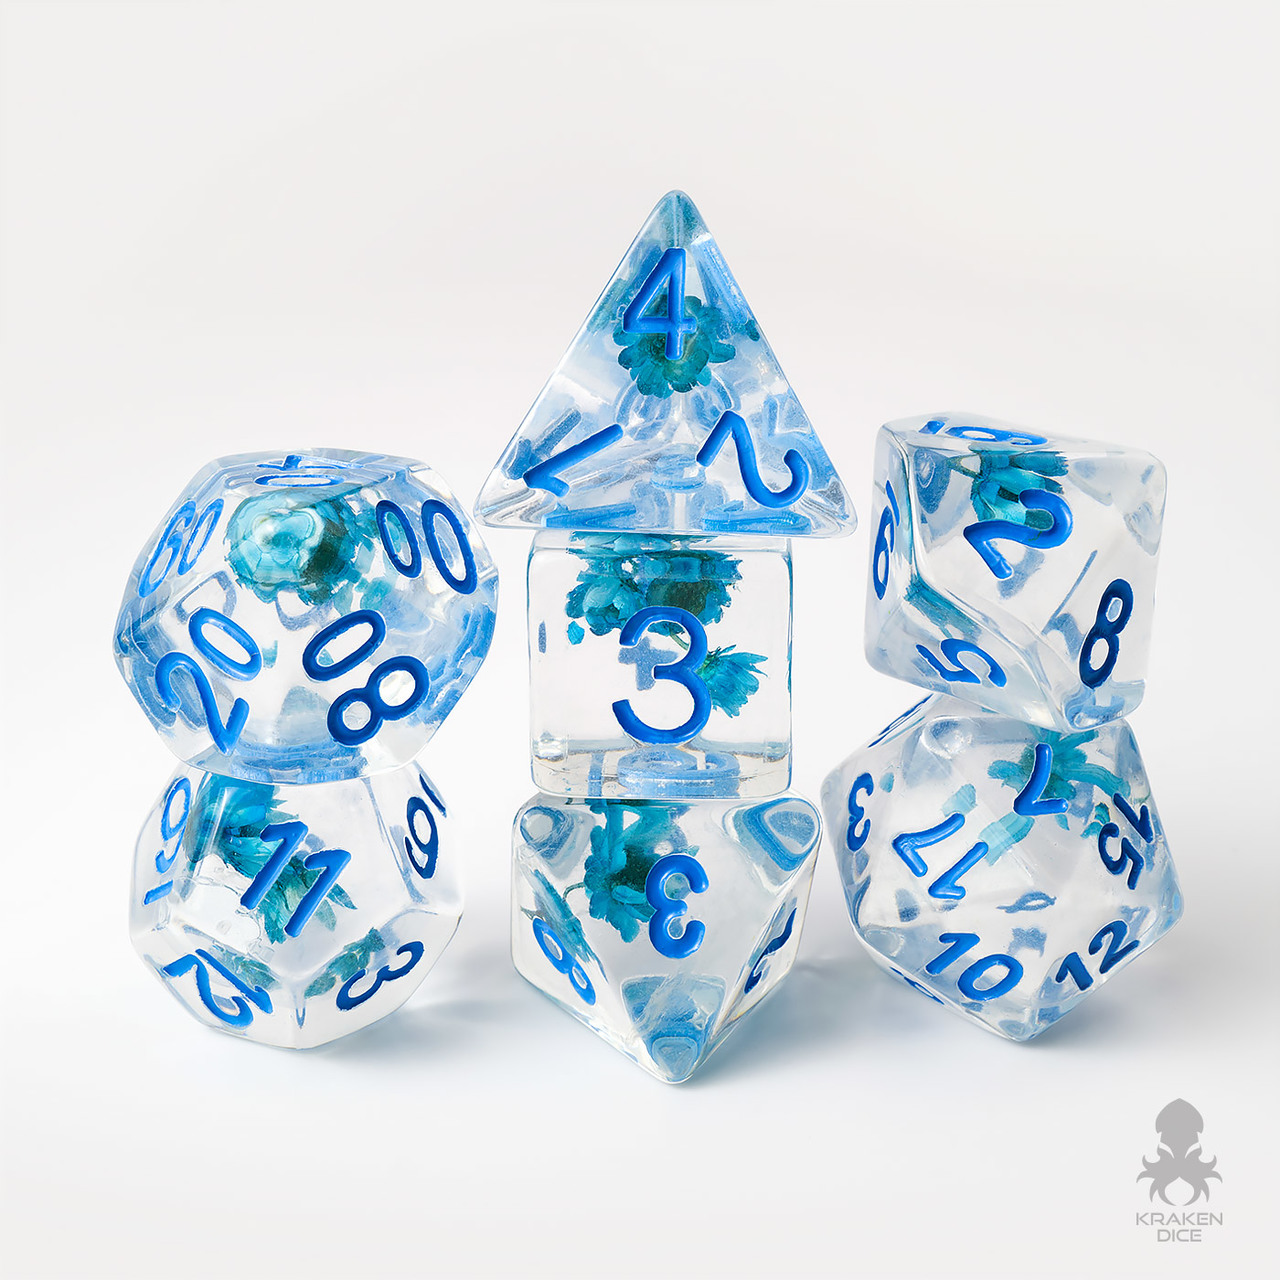 DND dice that are transparent with small blue flowers inside.